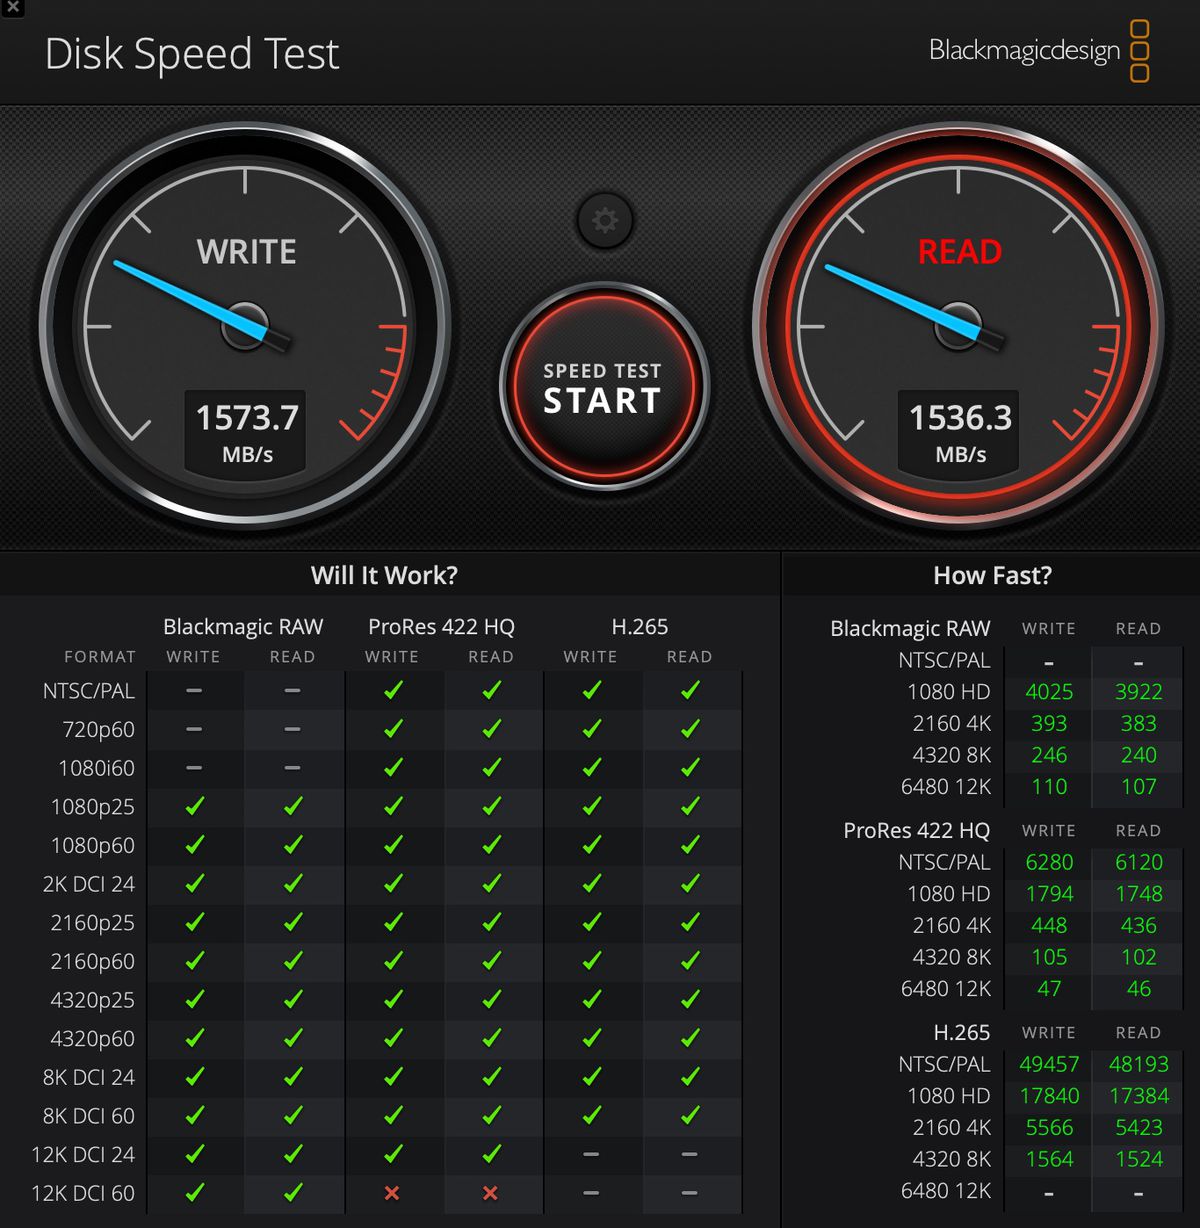 A screenshot of Blackmagic Disk Speed ​​Test indicating scores of 1537.7 for writing and 1536.3 for reading.